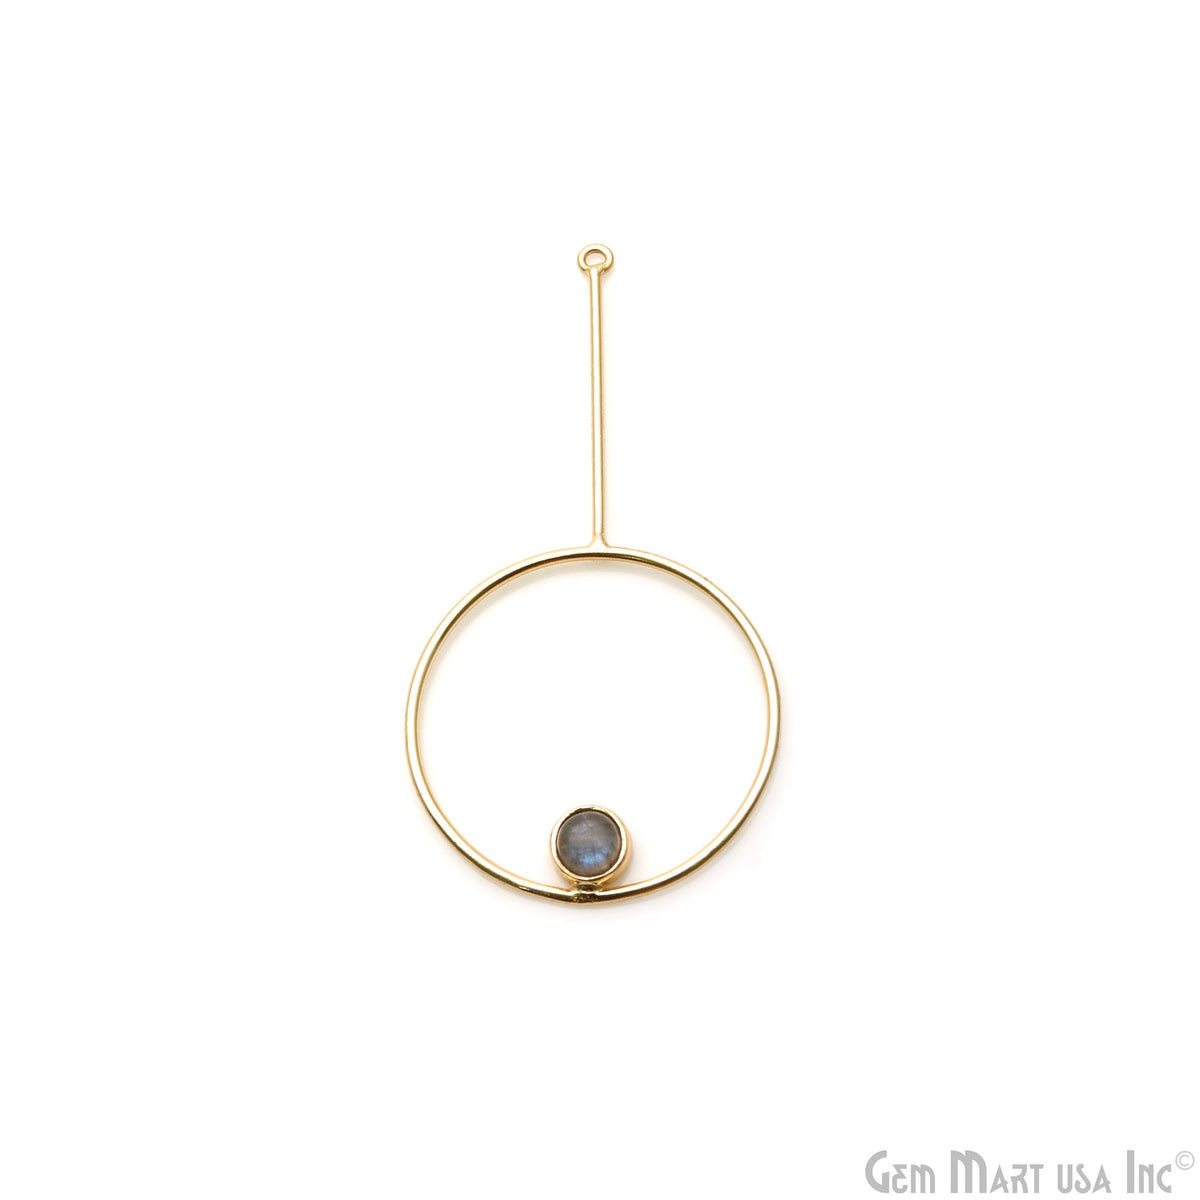 Round Dangler 66x33mm Gold Plated Gemstone Pendant Connector